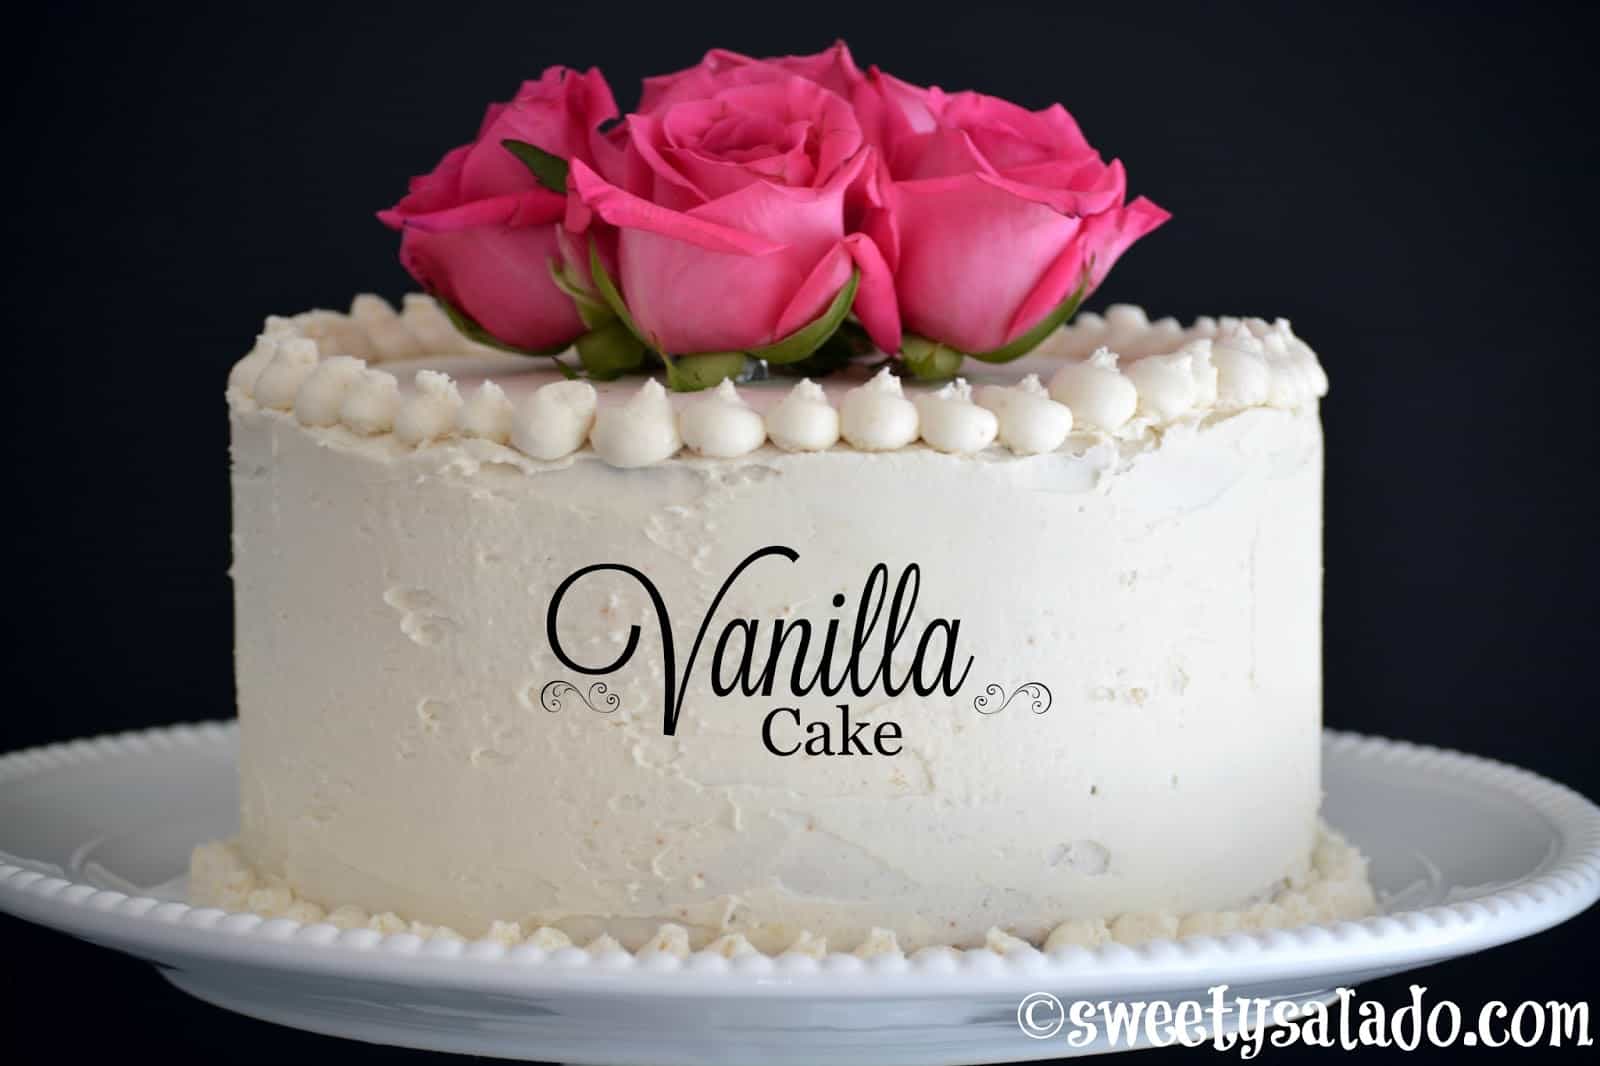 Delicious Homemade Vanilla Cake Recipes,How To Get Sap Out Of Clothes